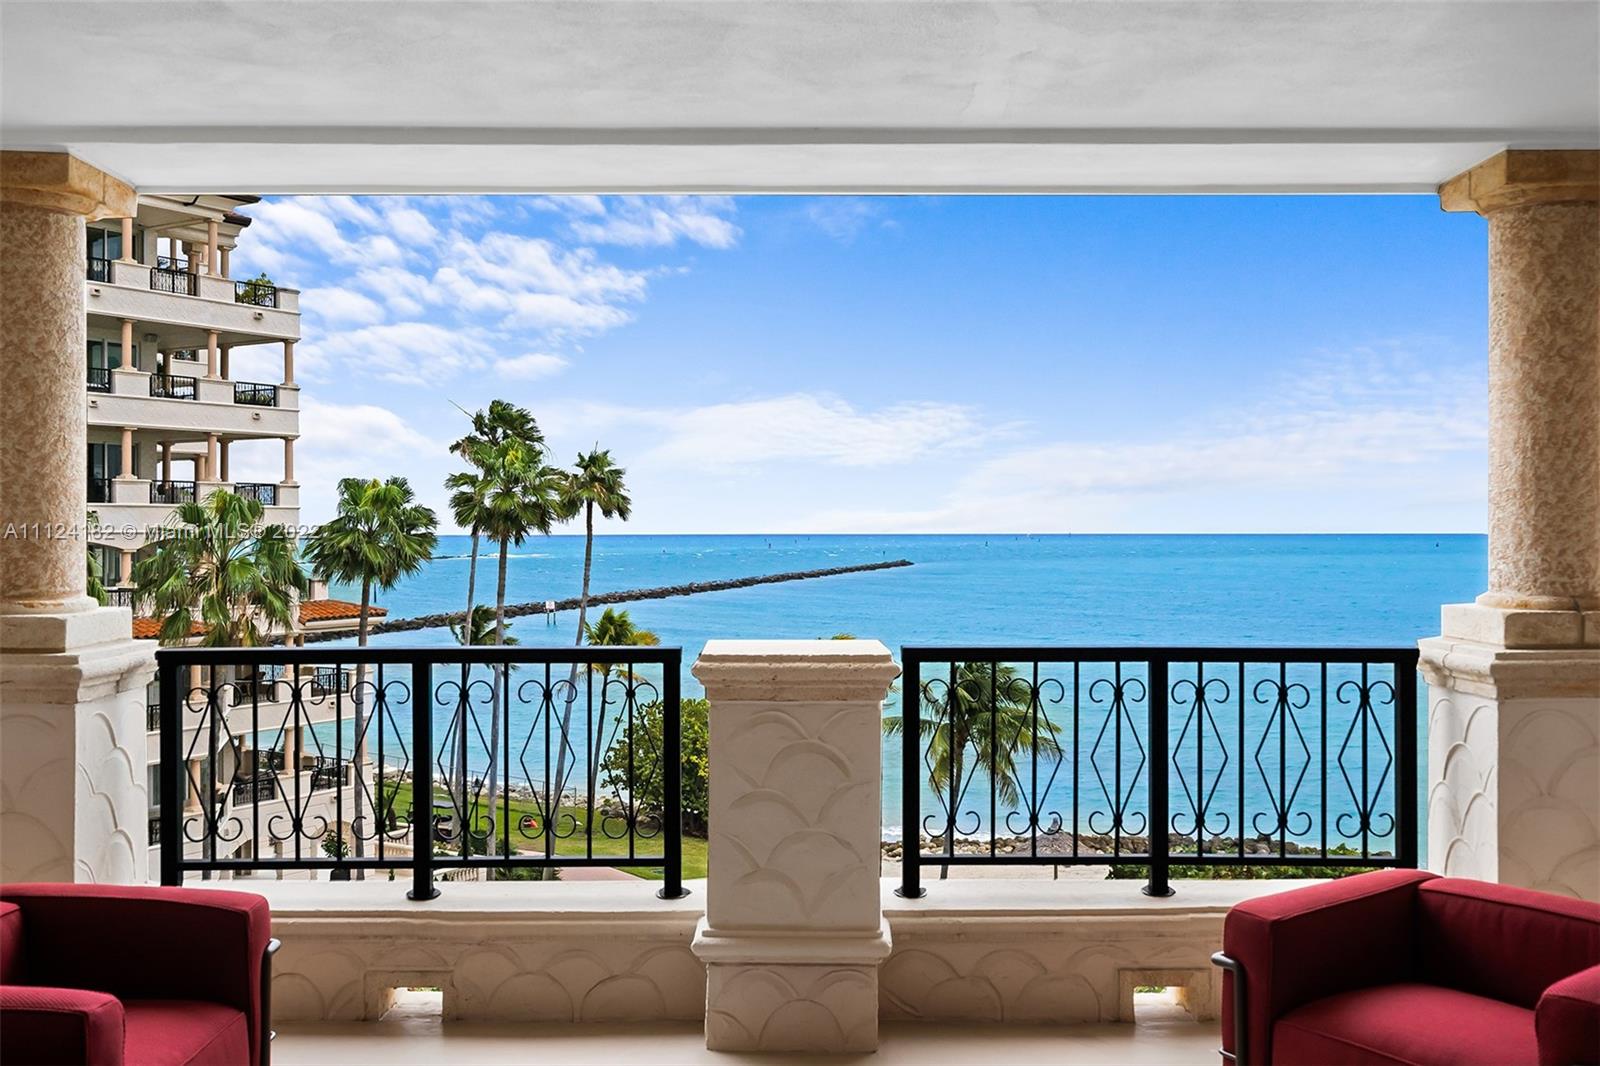 Oceanside Corner residence  Features 3 bedrooms with 4.5 baths has 3959 sqft of interior and 1600 sqft of terraces. Direct ocean views from living and master bedroom and Biscayne Bay and downtown views from the 2/3rd bedrooms. Snaidero kitchen with Gaggenau appliances.